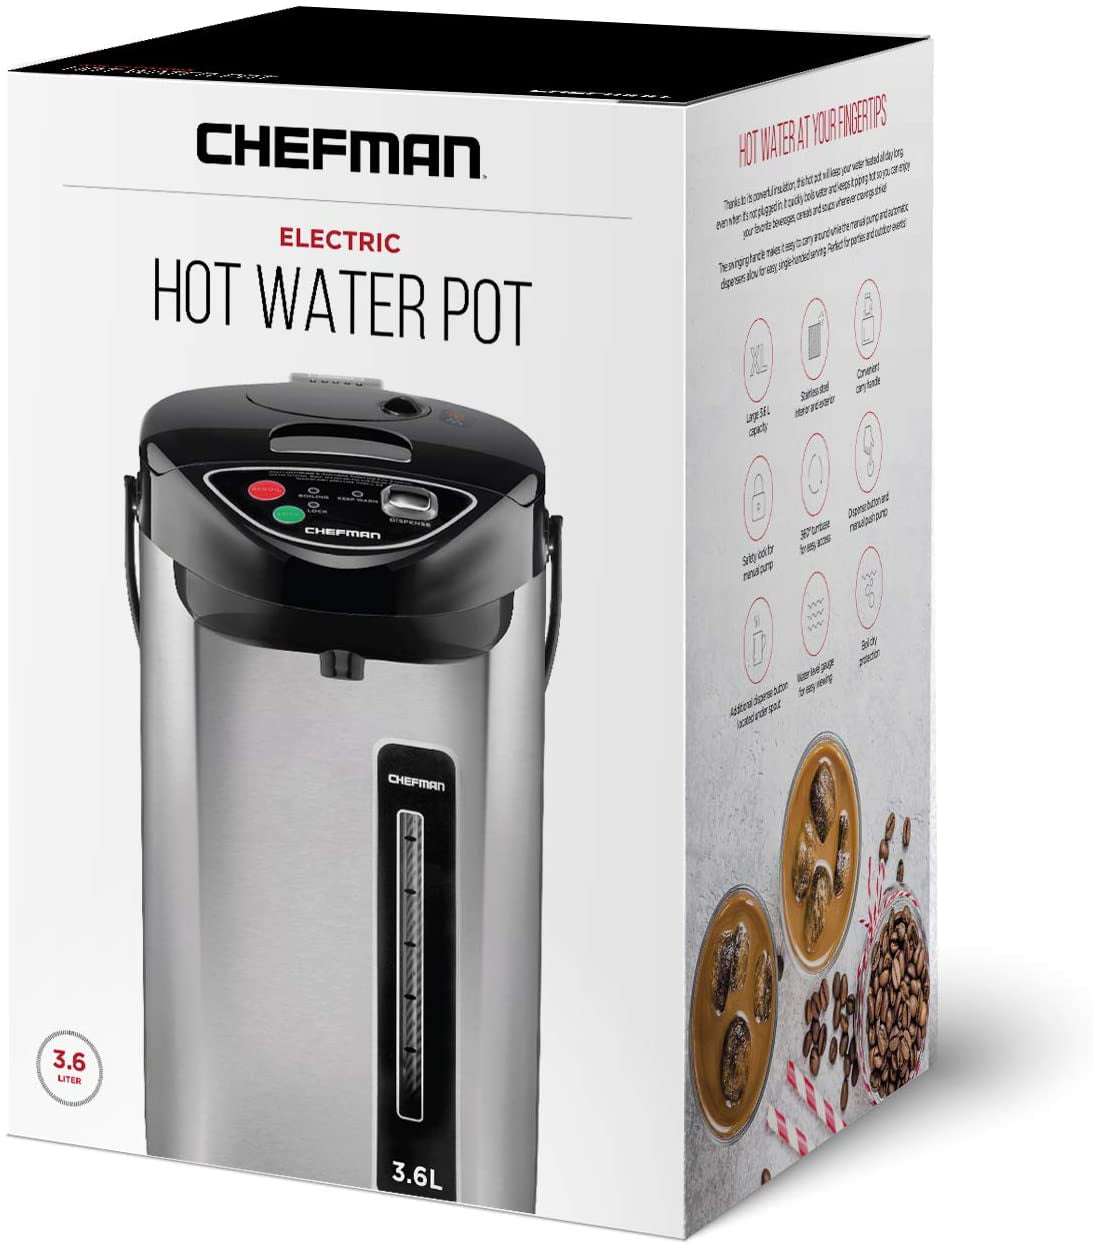 Electric Hot Water Pot Urn w/Auto  Manual Dispense Buttons, Safety Lock, Instant  Heating for Coffee  Tea, Auto-Shutoff  Boil Dry Protection, Insulated Stainless  Steel, 3.6L/3.8 Qt/20+ Cups - Walmart.com